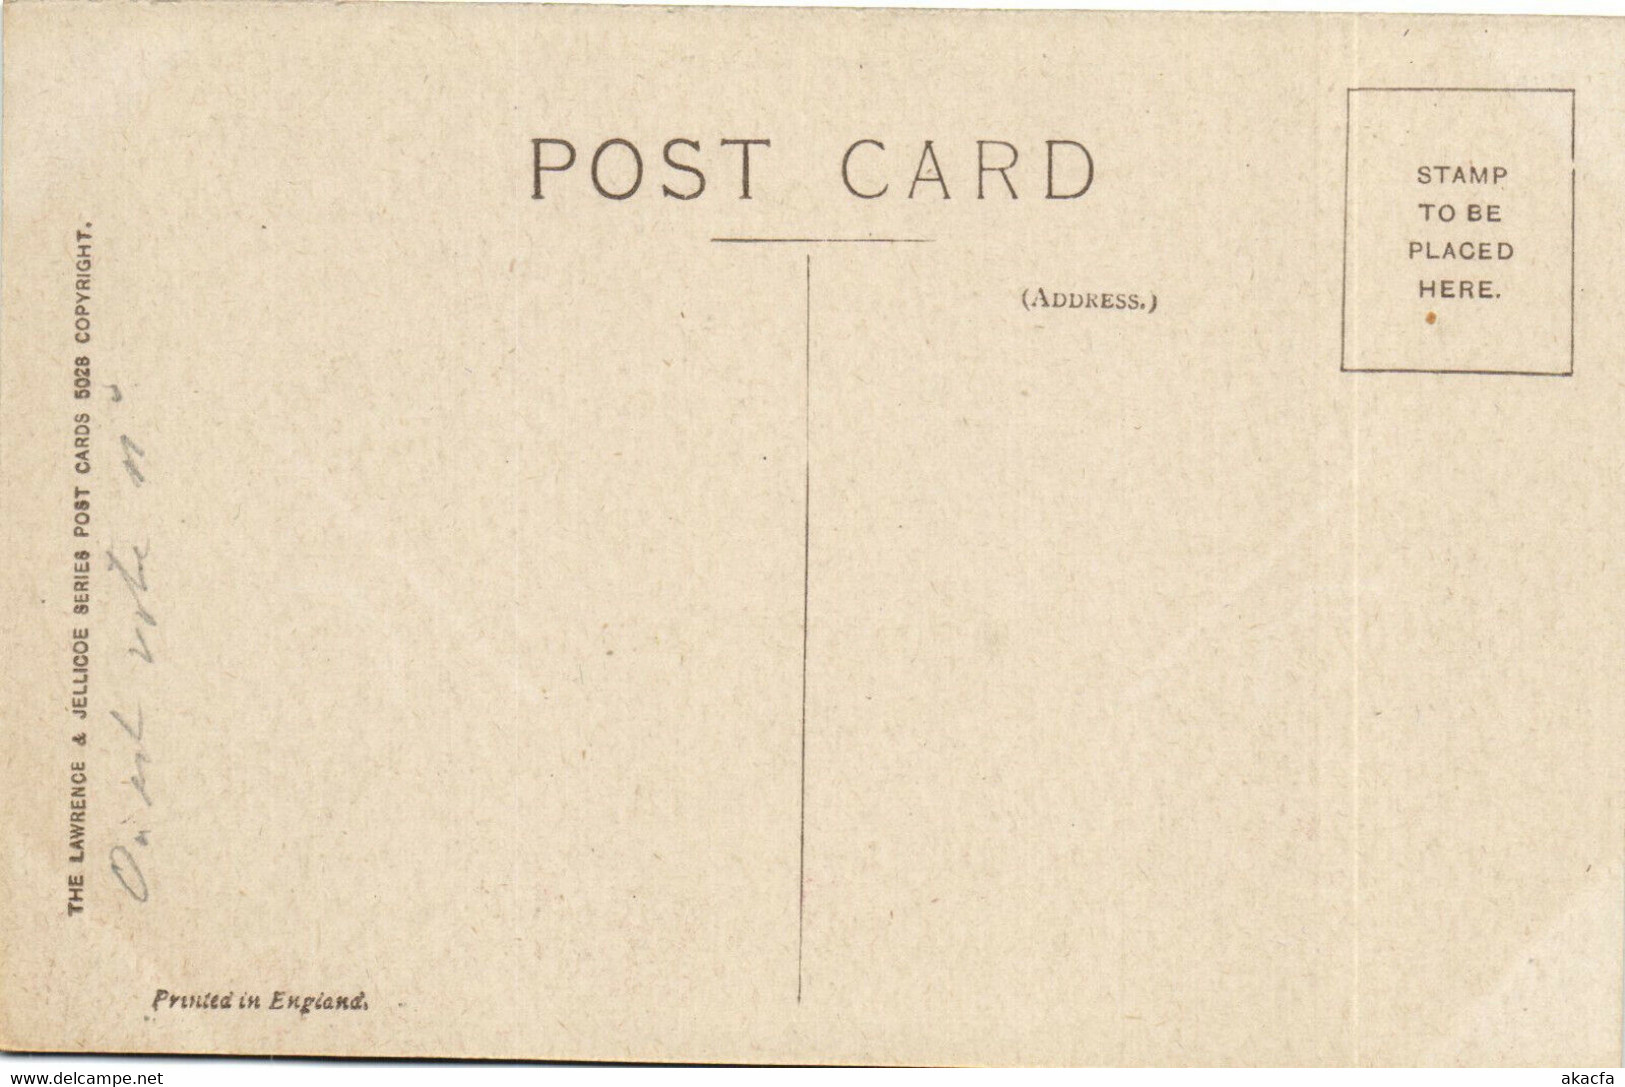 PC LAWSON WOOD, ARTIST SIGNED, WHERE'S YOUR NUMBER, Vintage Postcard (b35410) - Wood, Lawson